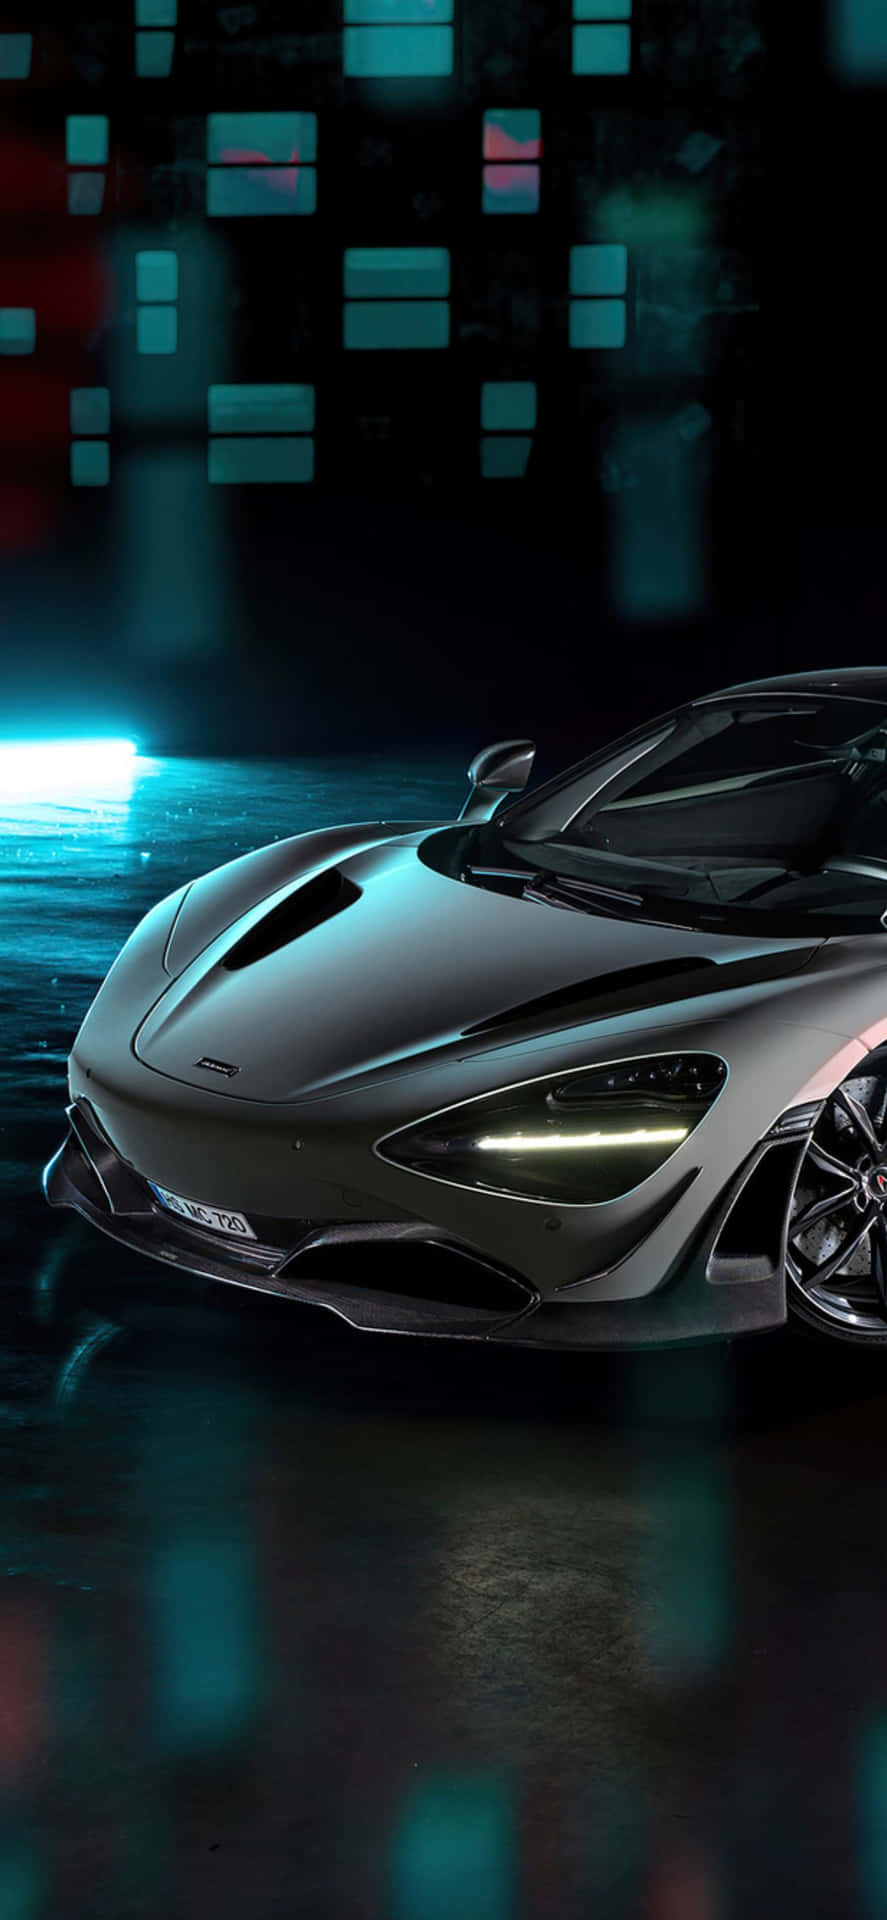 Let speed and style come together in the all-new 2021 Iphone Xs Max Mclaren 720s!